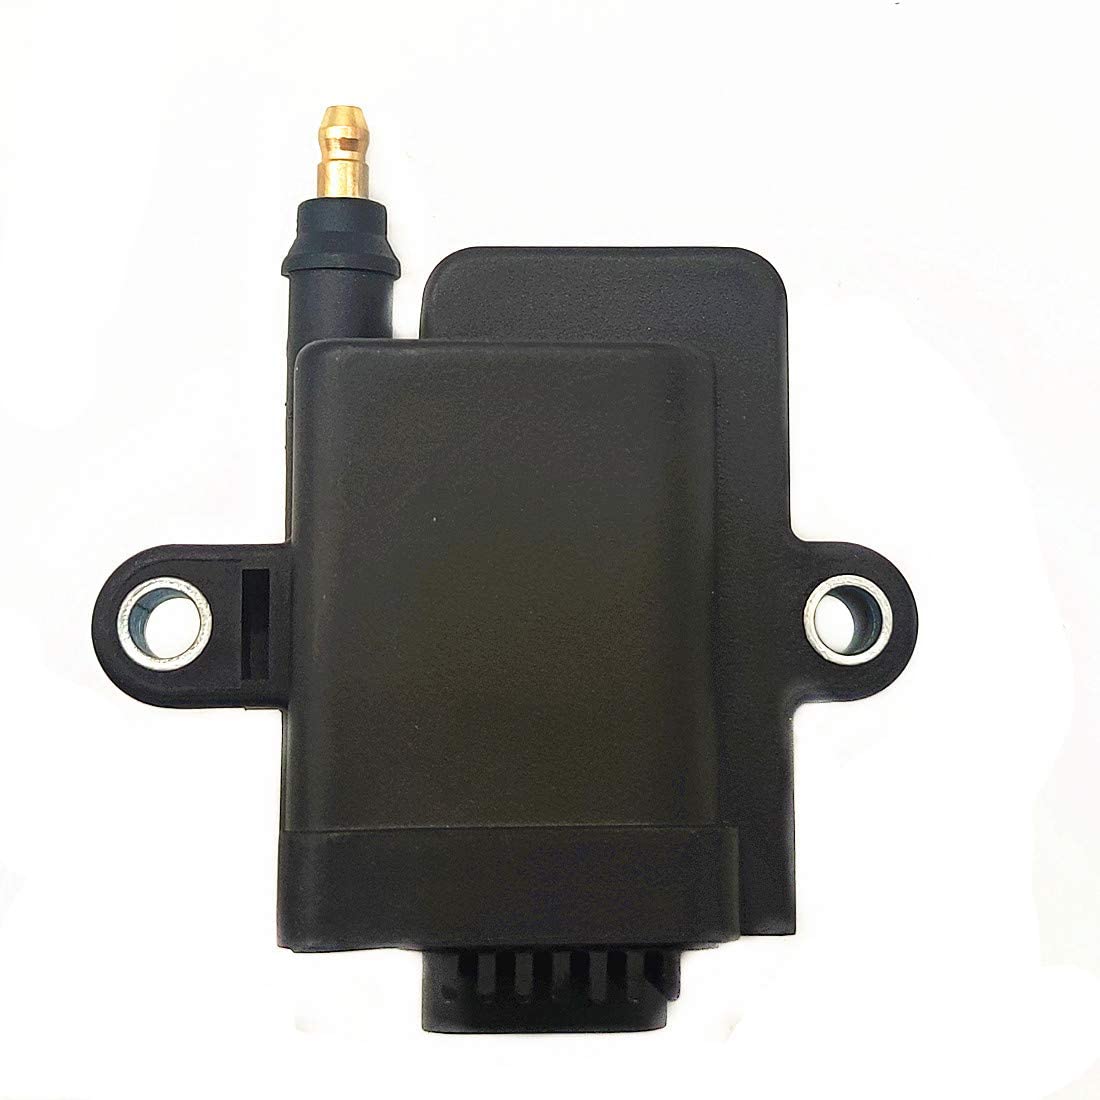 339-8M0077473 / 339-883778A01 / 339-883778A02 Hot Sell Car Best Ignition Coil For Car